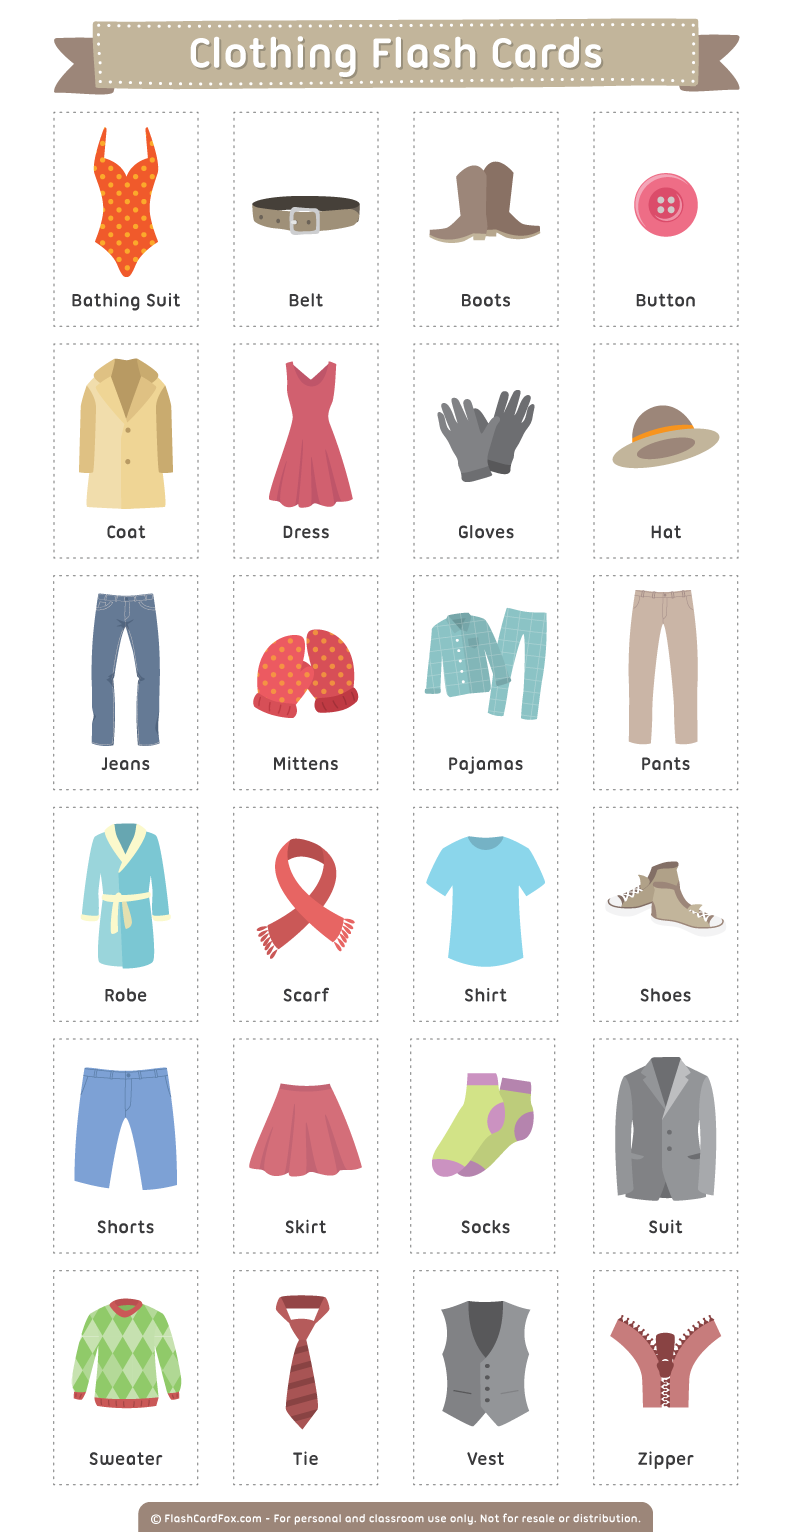 60-clothing-flashcards-for-kids-60-items-of-clothing-to-learn-with